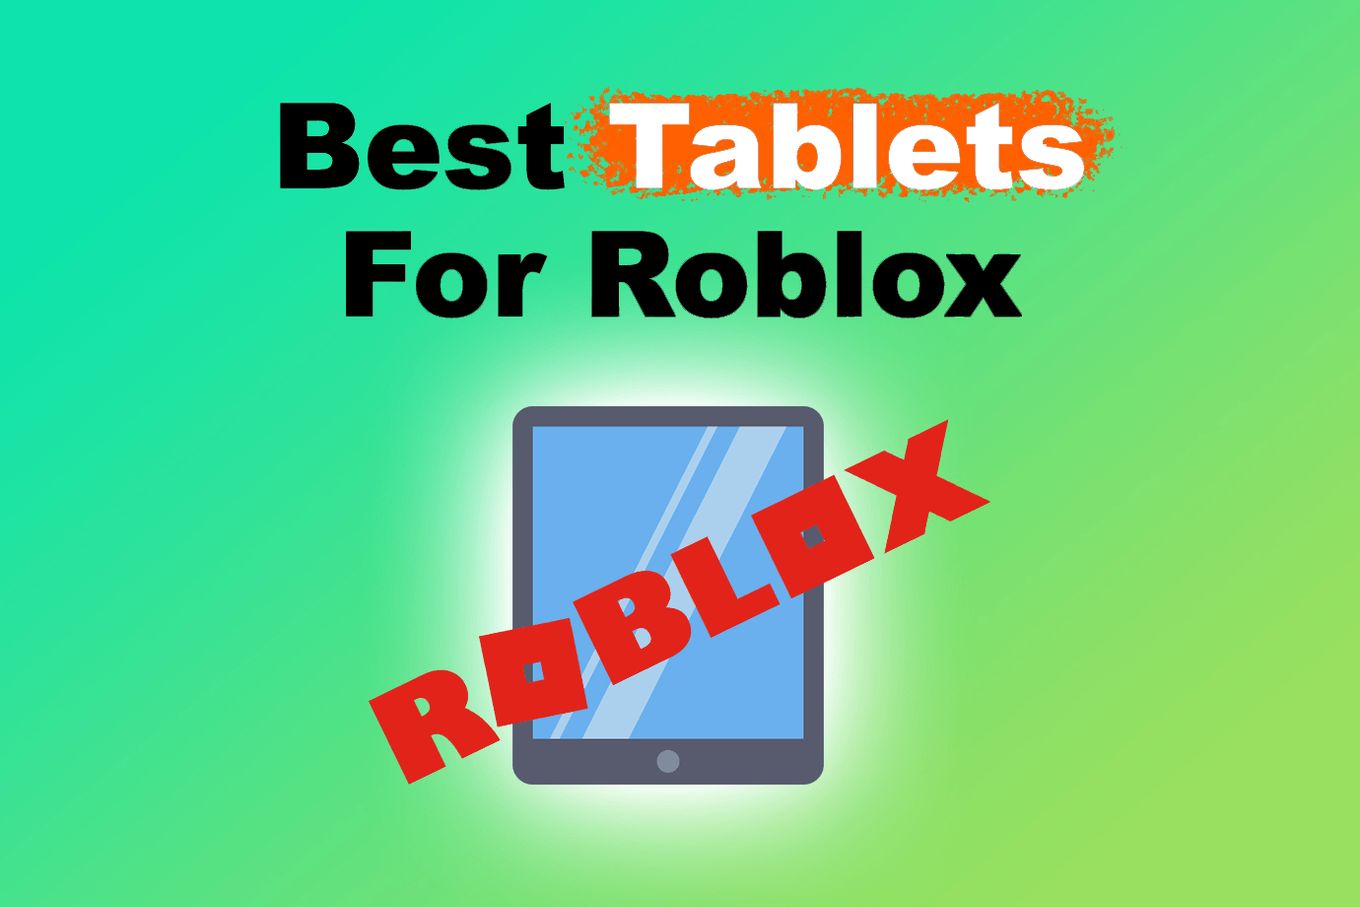 How To Make A Game On Roblox On Tablet?